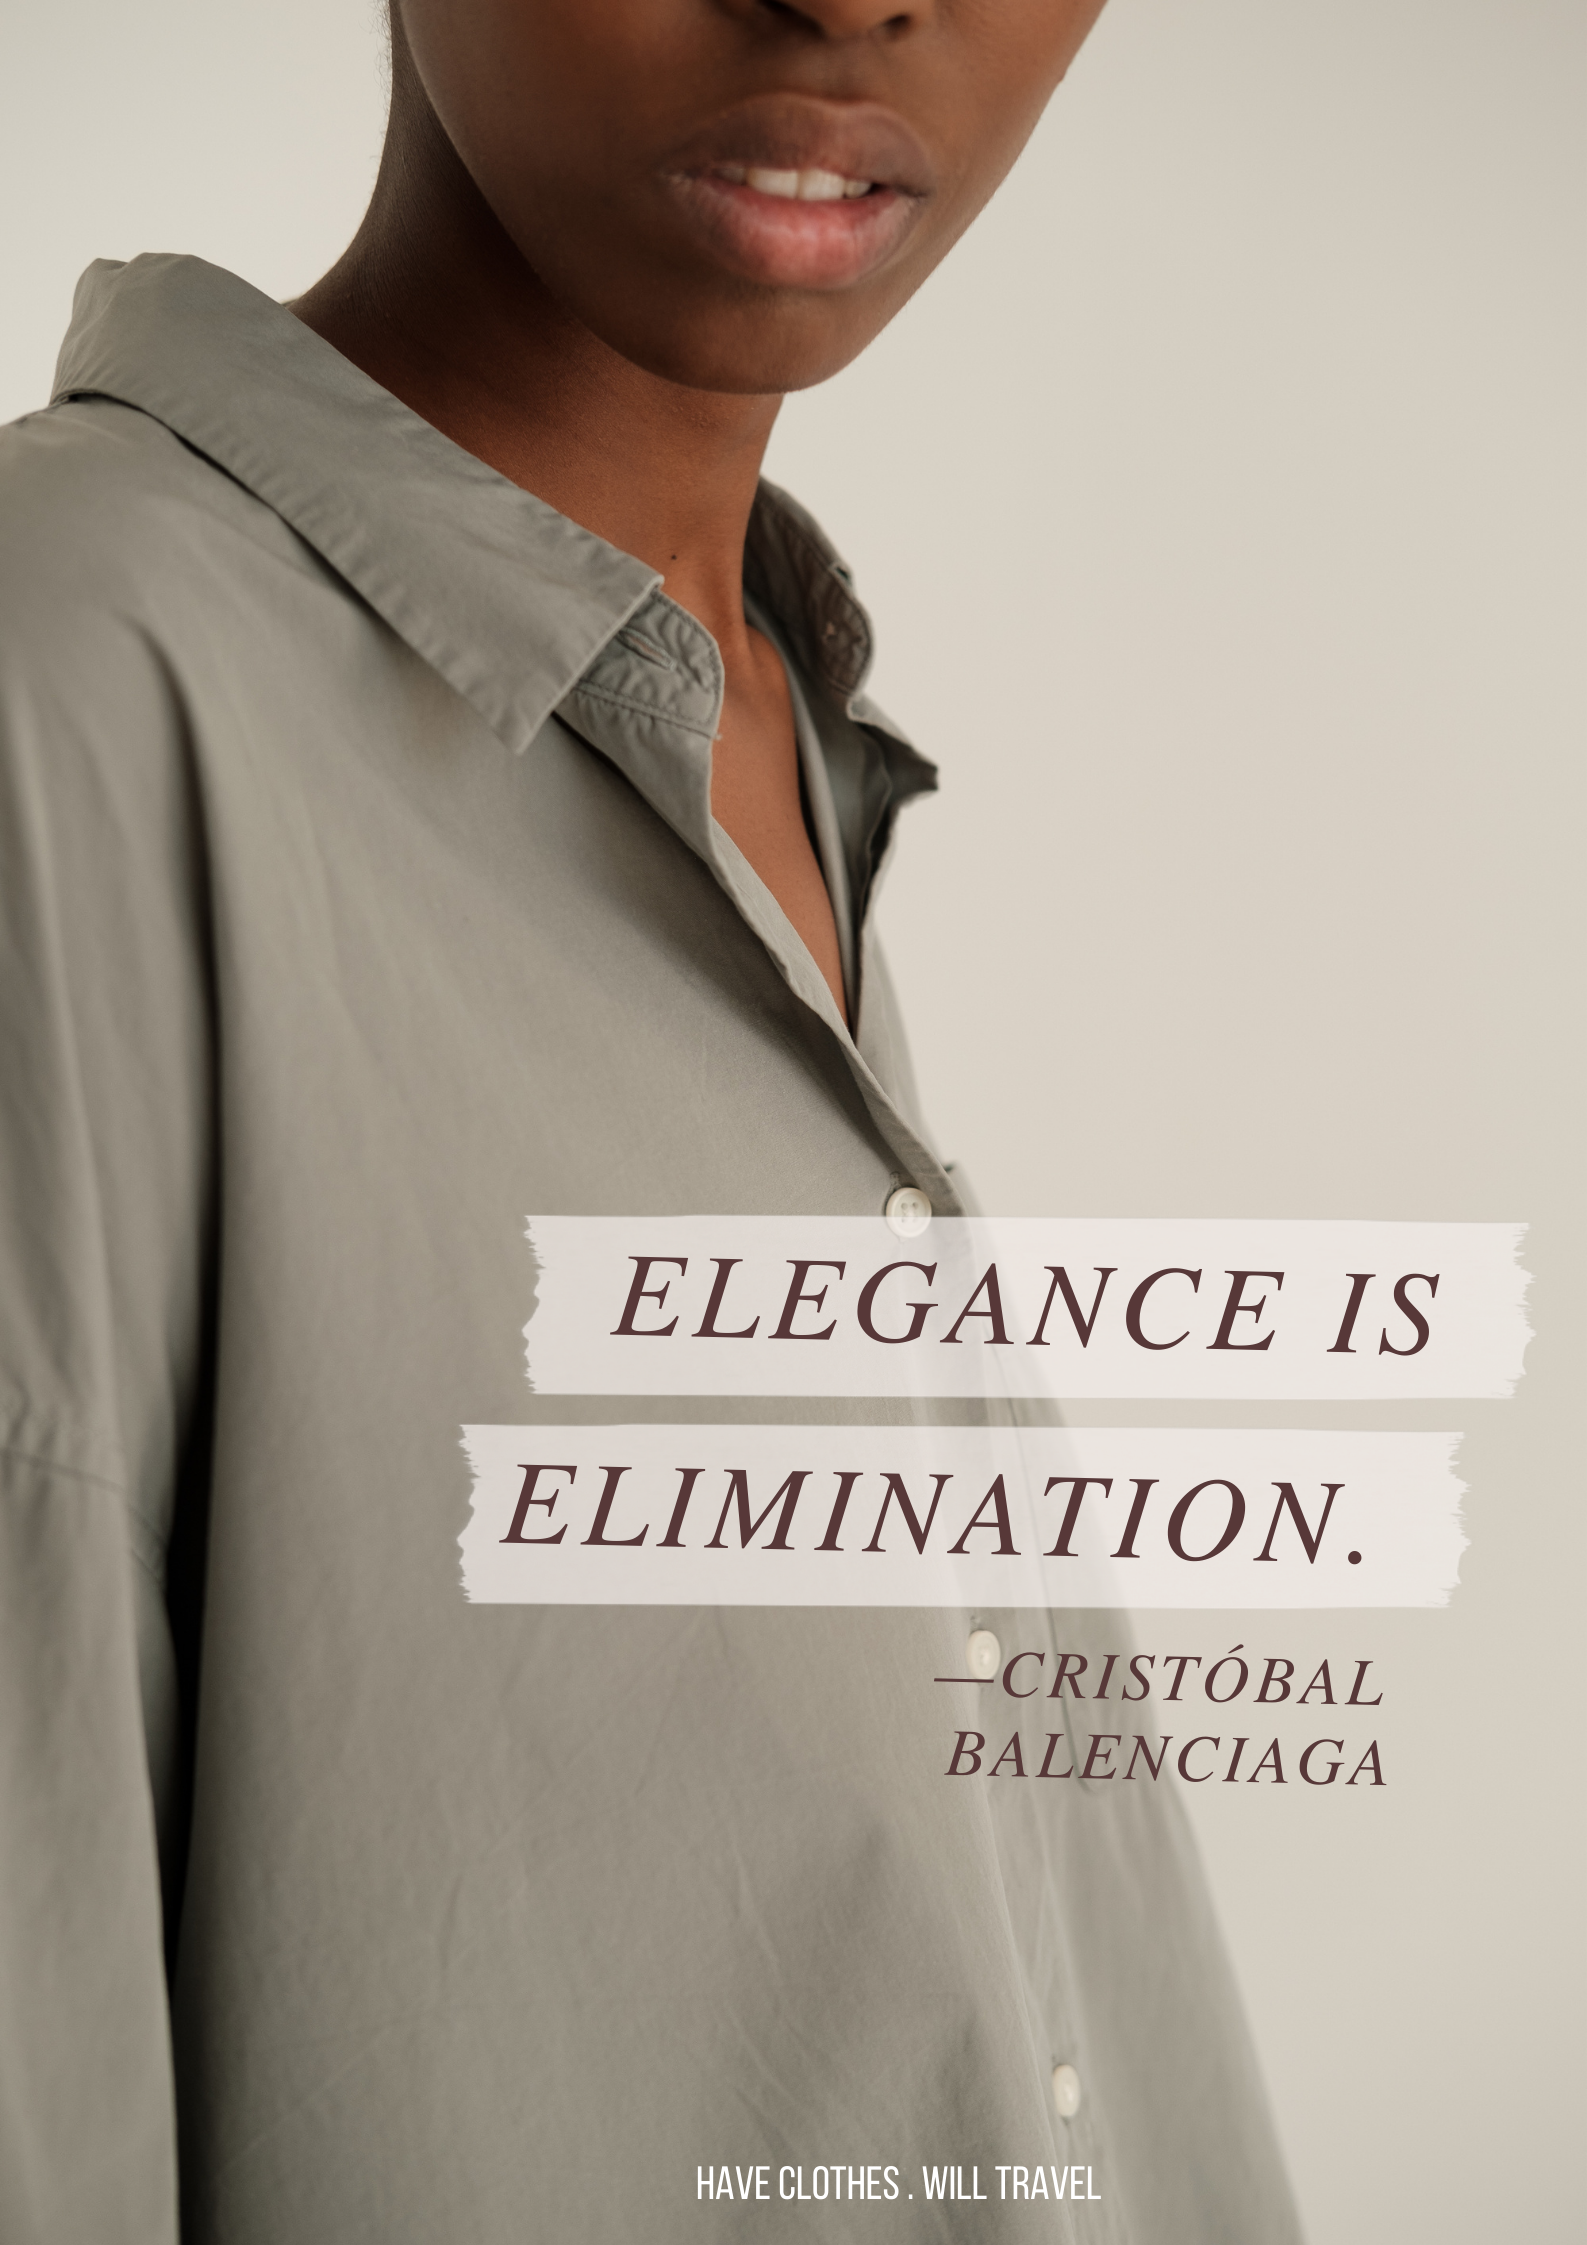 A simple image of a young model wearing a classic gray linen shirt. The image is cropped to only show the model's face from the chin down. Text on the image reads, "Elegance is elimination. — Cristóbal Balenciaga"